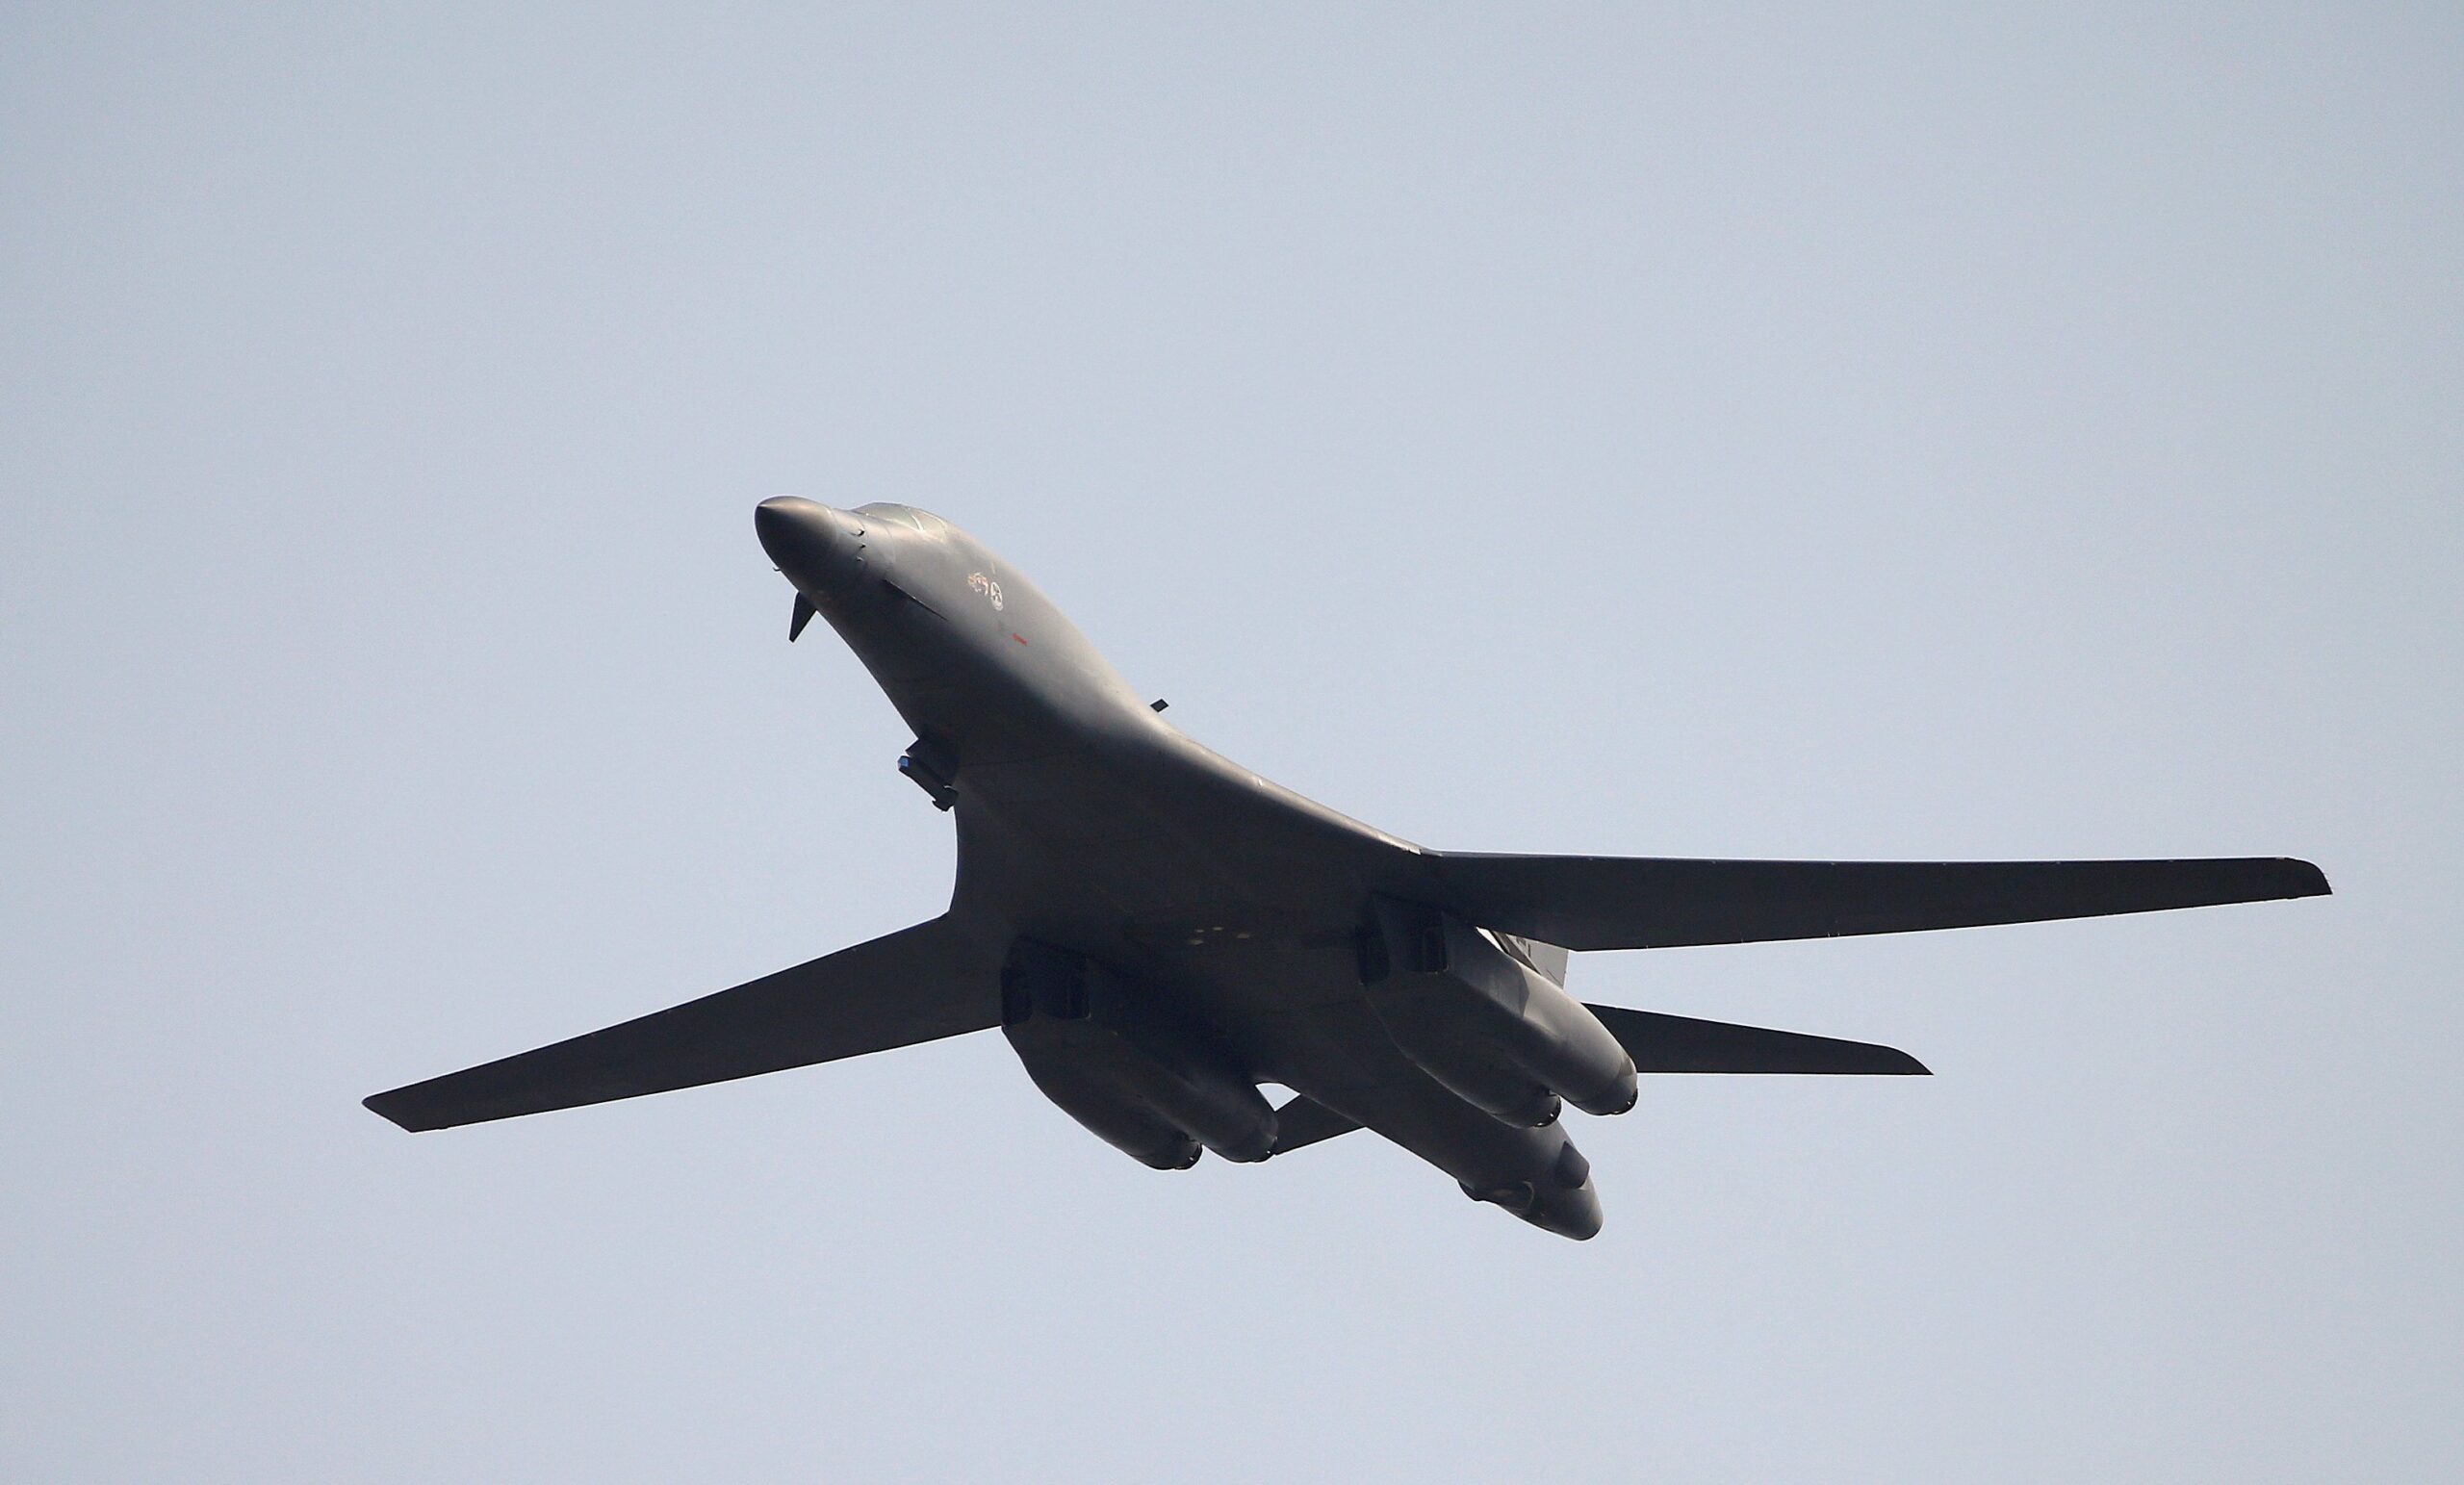 A U.S. Air Force B-1B bomber is pictured in a file photo flying over Osan Air Base in Pyeongtaek, South Korea. The Department of Defense announced Oct. 27, 2023, that it is seeking congressional approval to update the B61 nuclear gravity bomb, a move that concerns Catholic leaders and peace advocates. (OSV News photo/Kim Hong-Ji, Reuters)